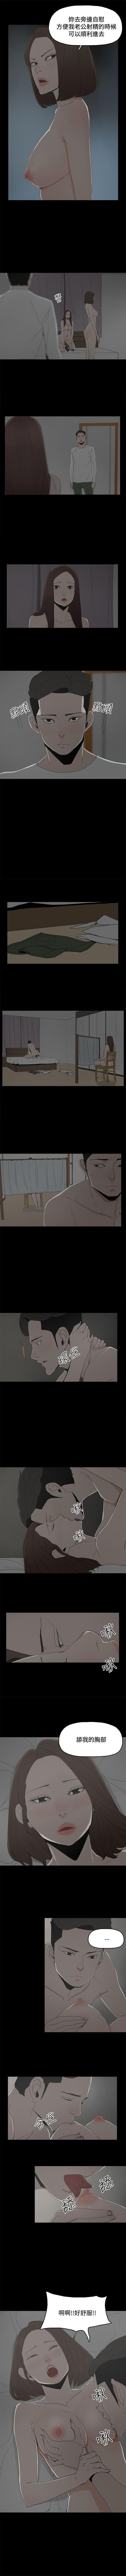 Wet Cunts 代理孕母 18 [Chinese] Manhwa Freaky - Page 5